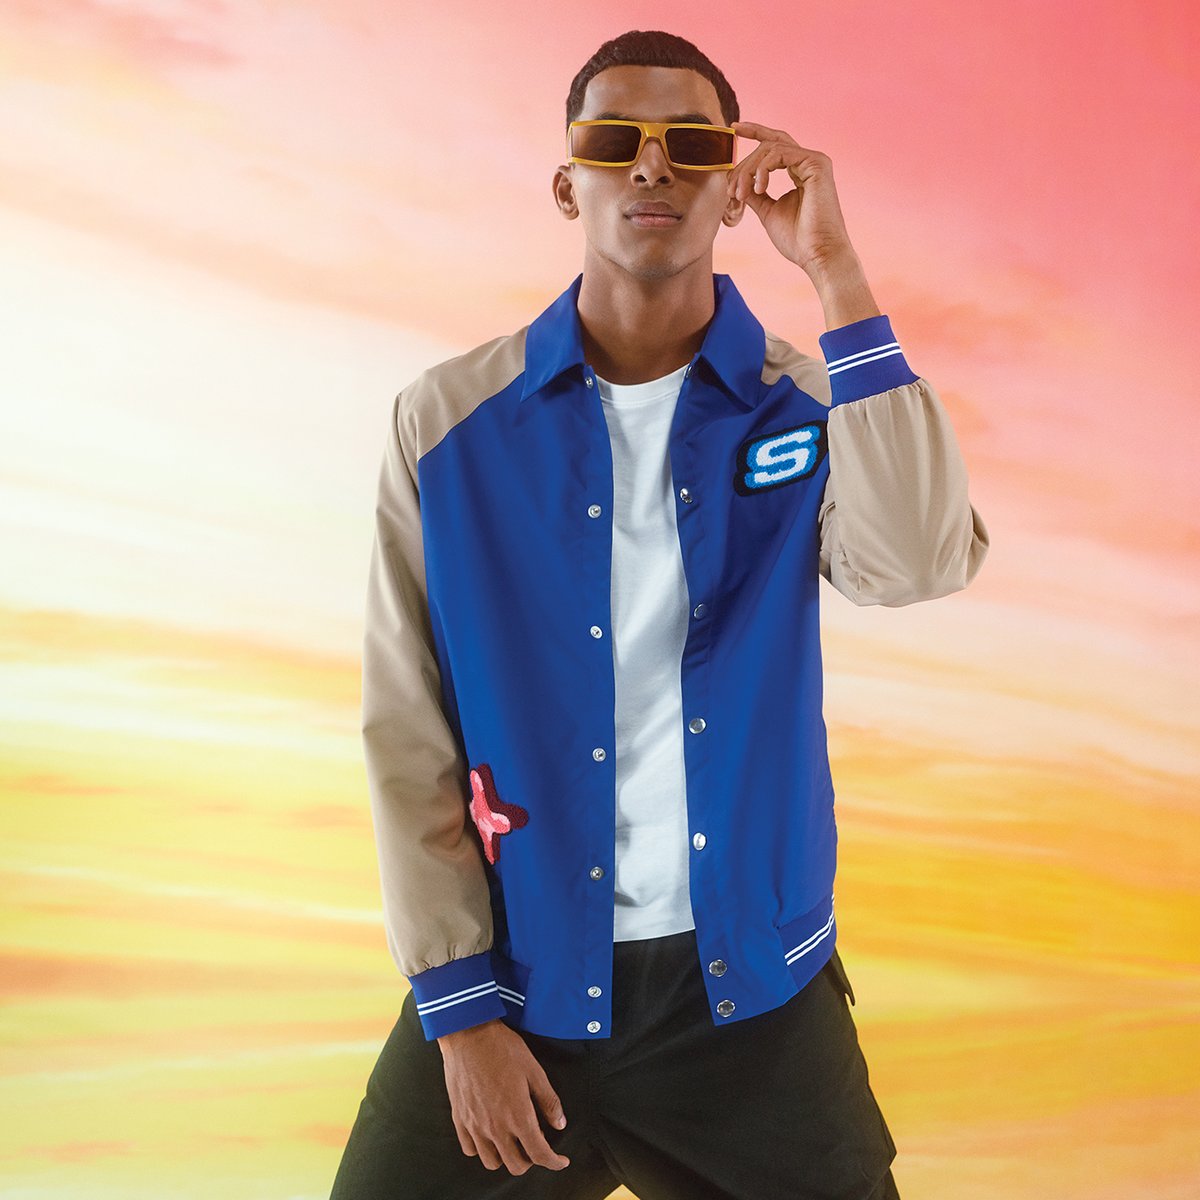 We're going back to the 90s! Shop this timeless varsity jacket from the Skechers #Retroverse Collection. Check out styles from the collection: shorturl.at/ioFW7 #SkechersIndia #Retroverse #90sStyle #LimitedEdition #FashionWeek #RetroStyle #SkechersApparel #StreetStyle